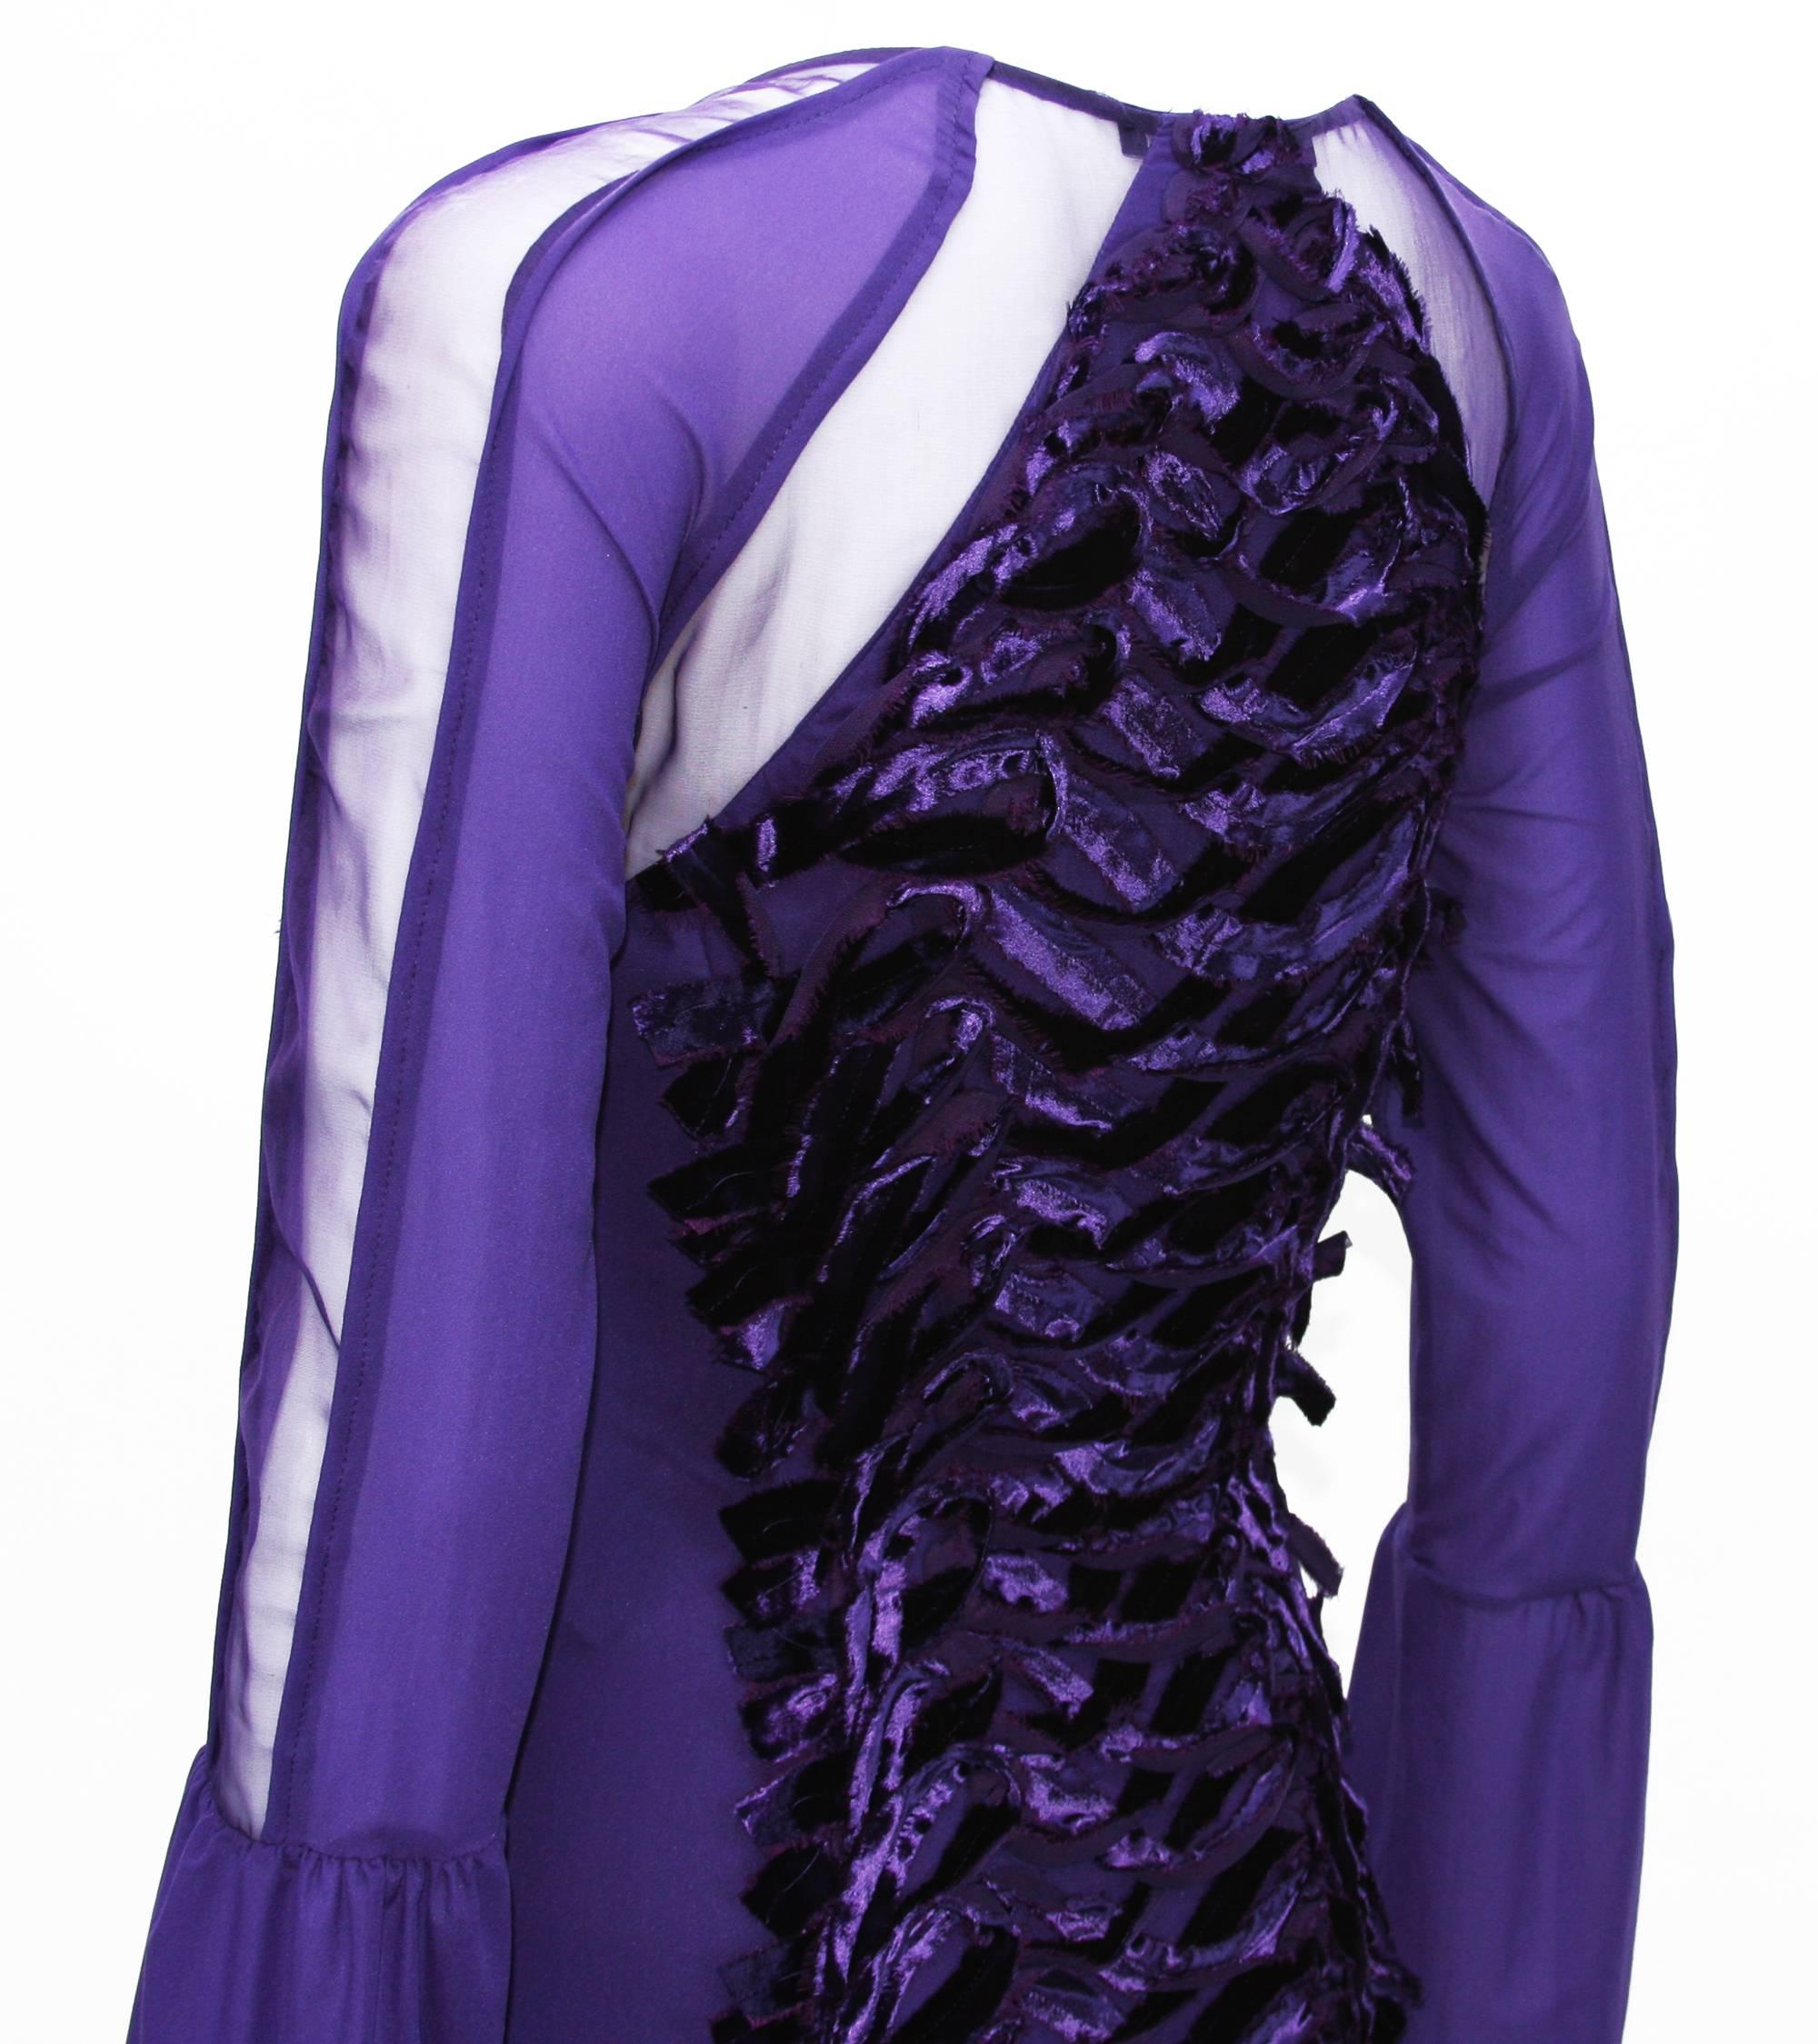 TOM FORD for GUCCI - Robe en velours stretch violette, collection A/H 2004, taille 40 - 4 en vente 3